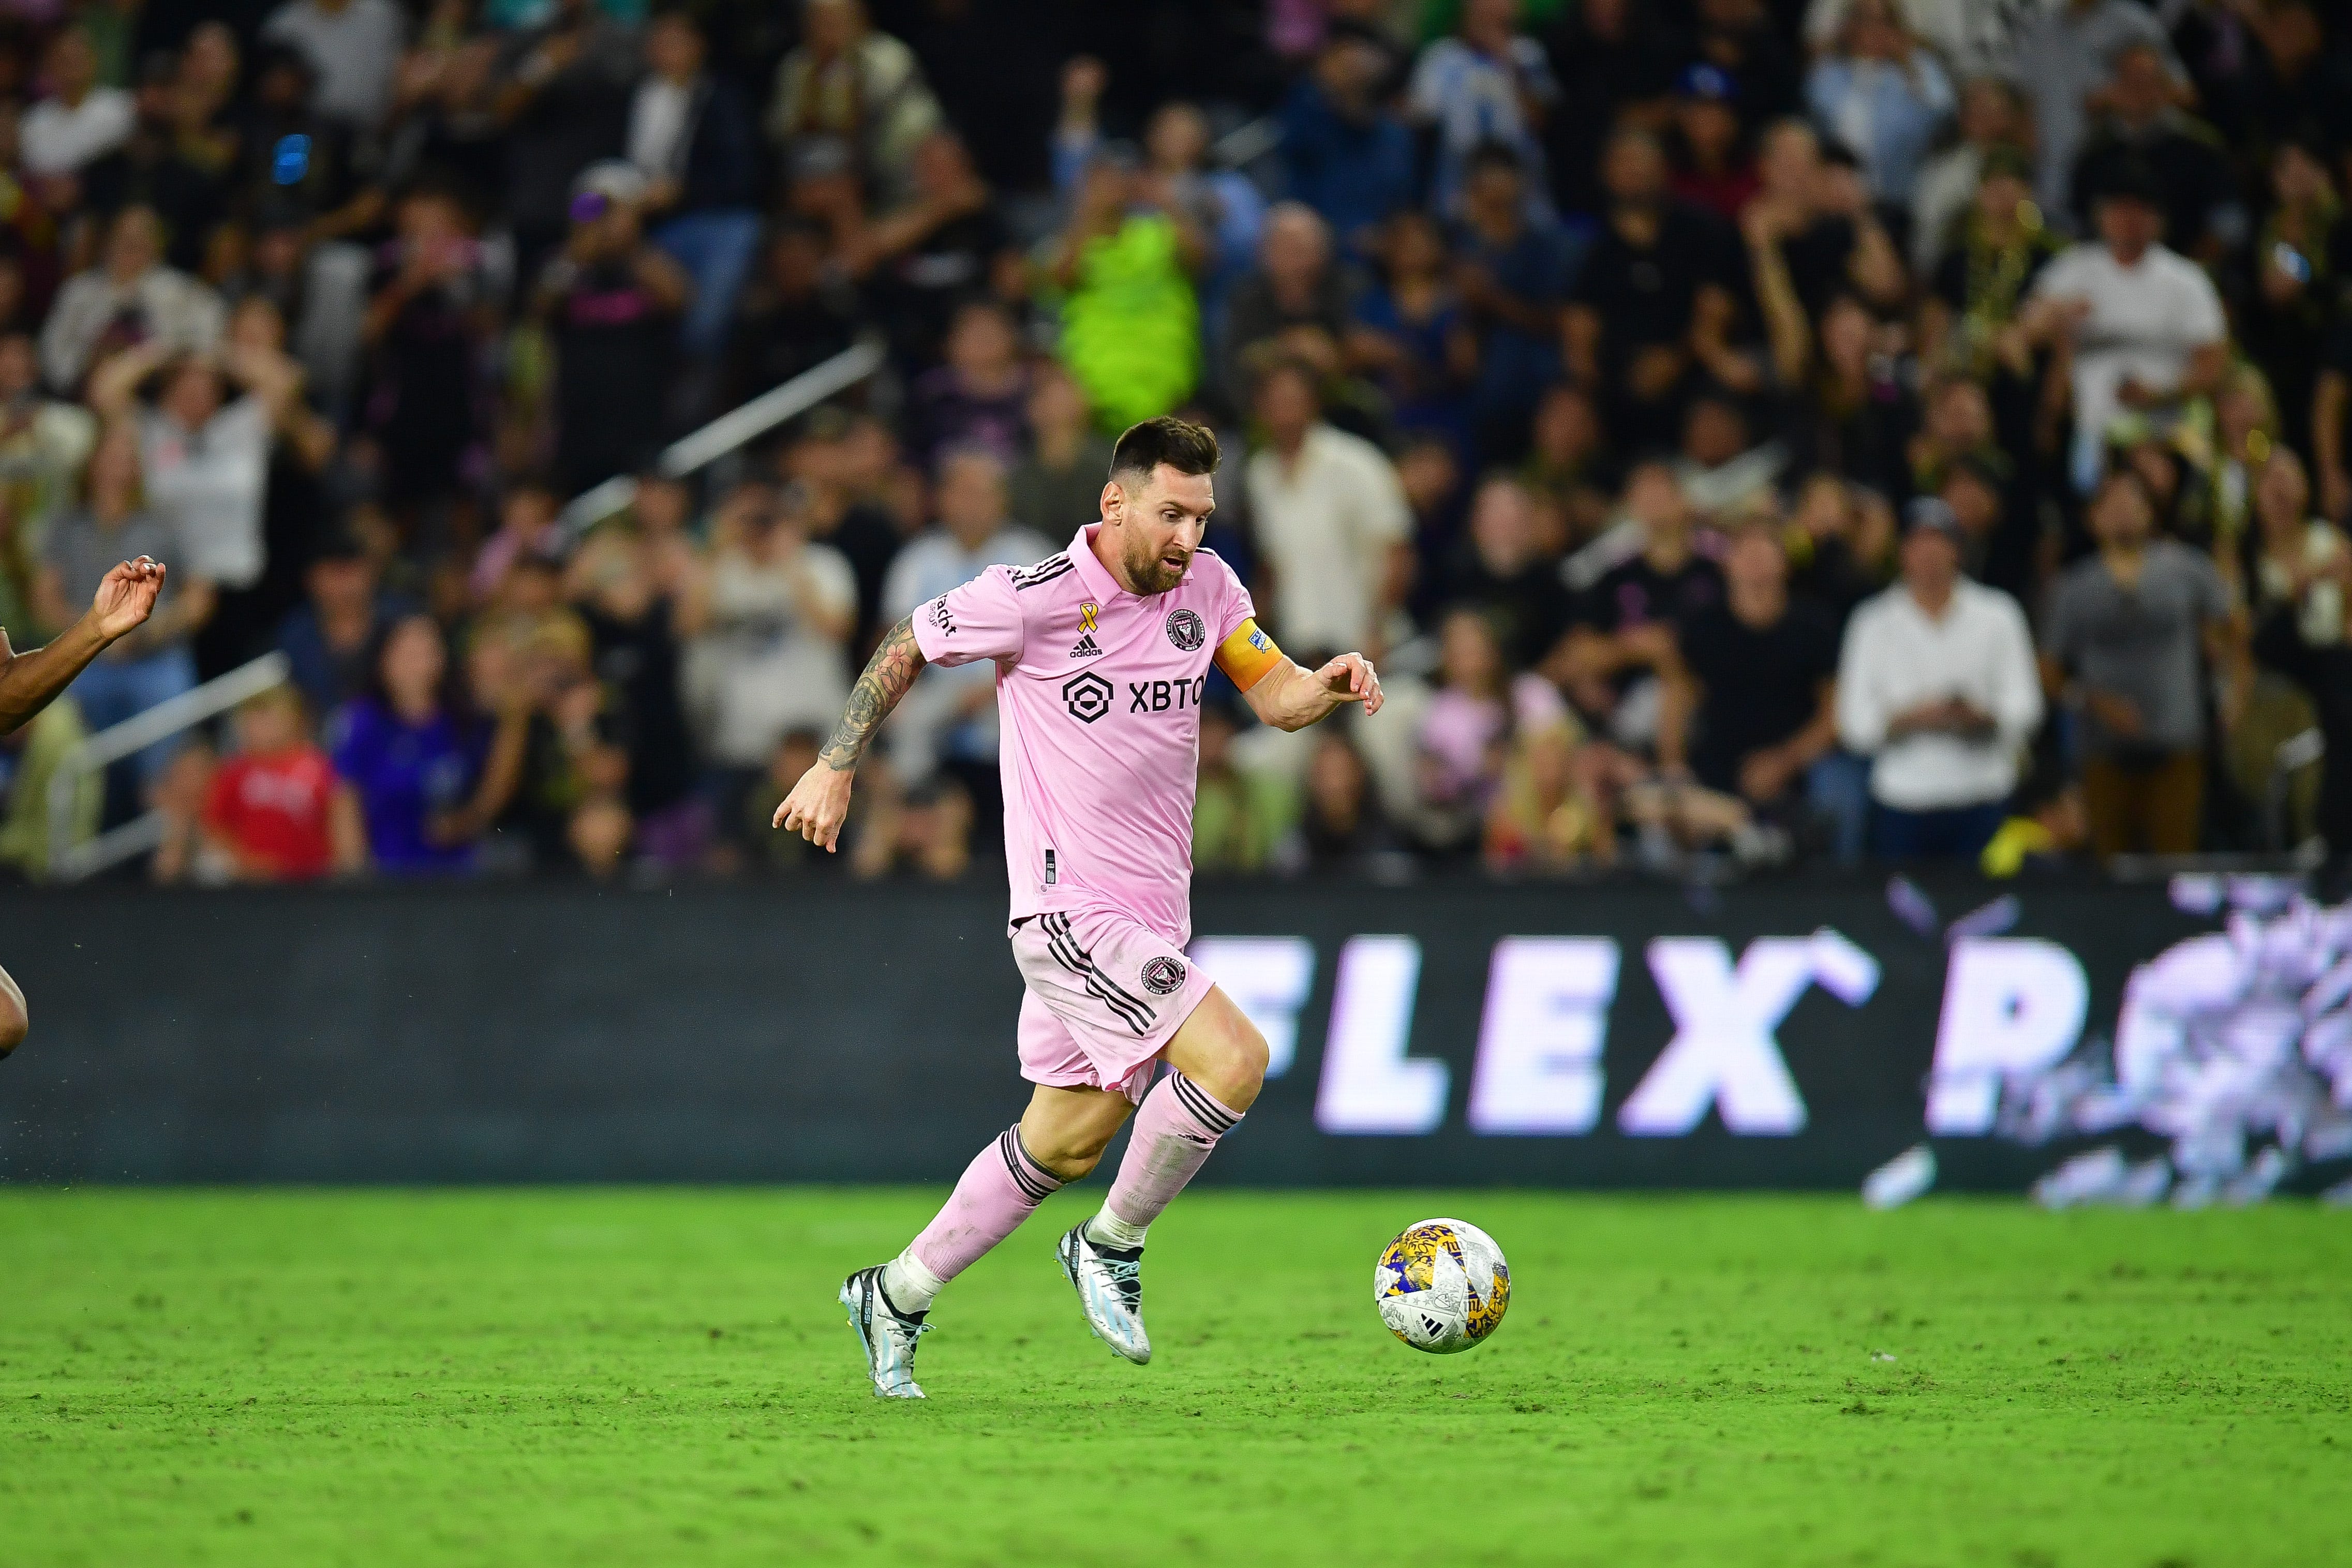 Lionel Messi out for Inter Miami vs. Atlanta United: How to watch, stream online